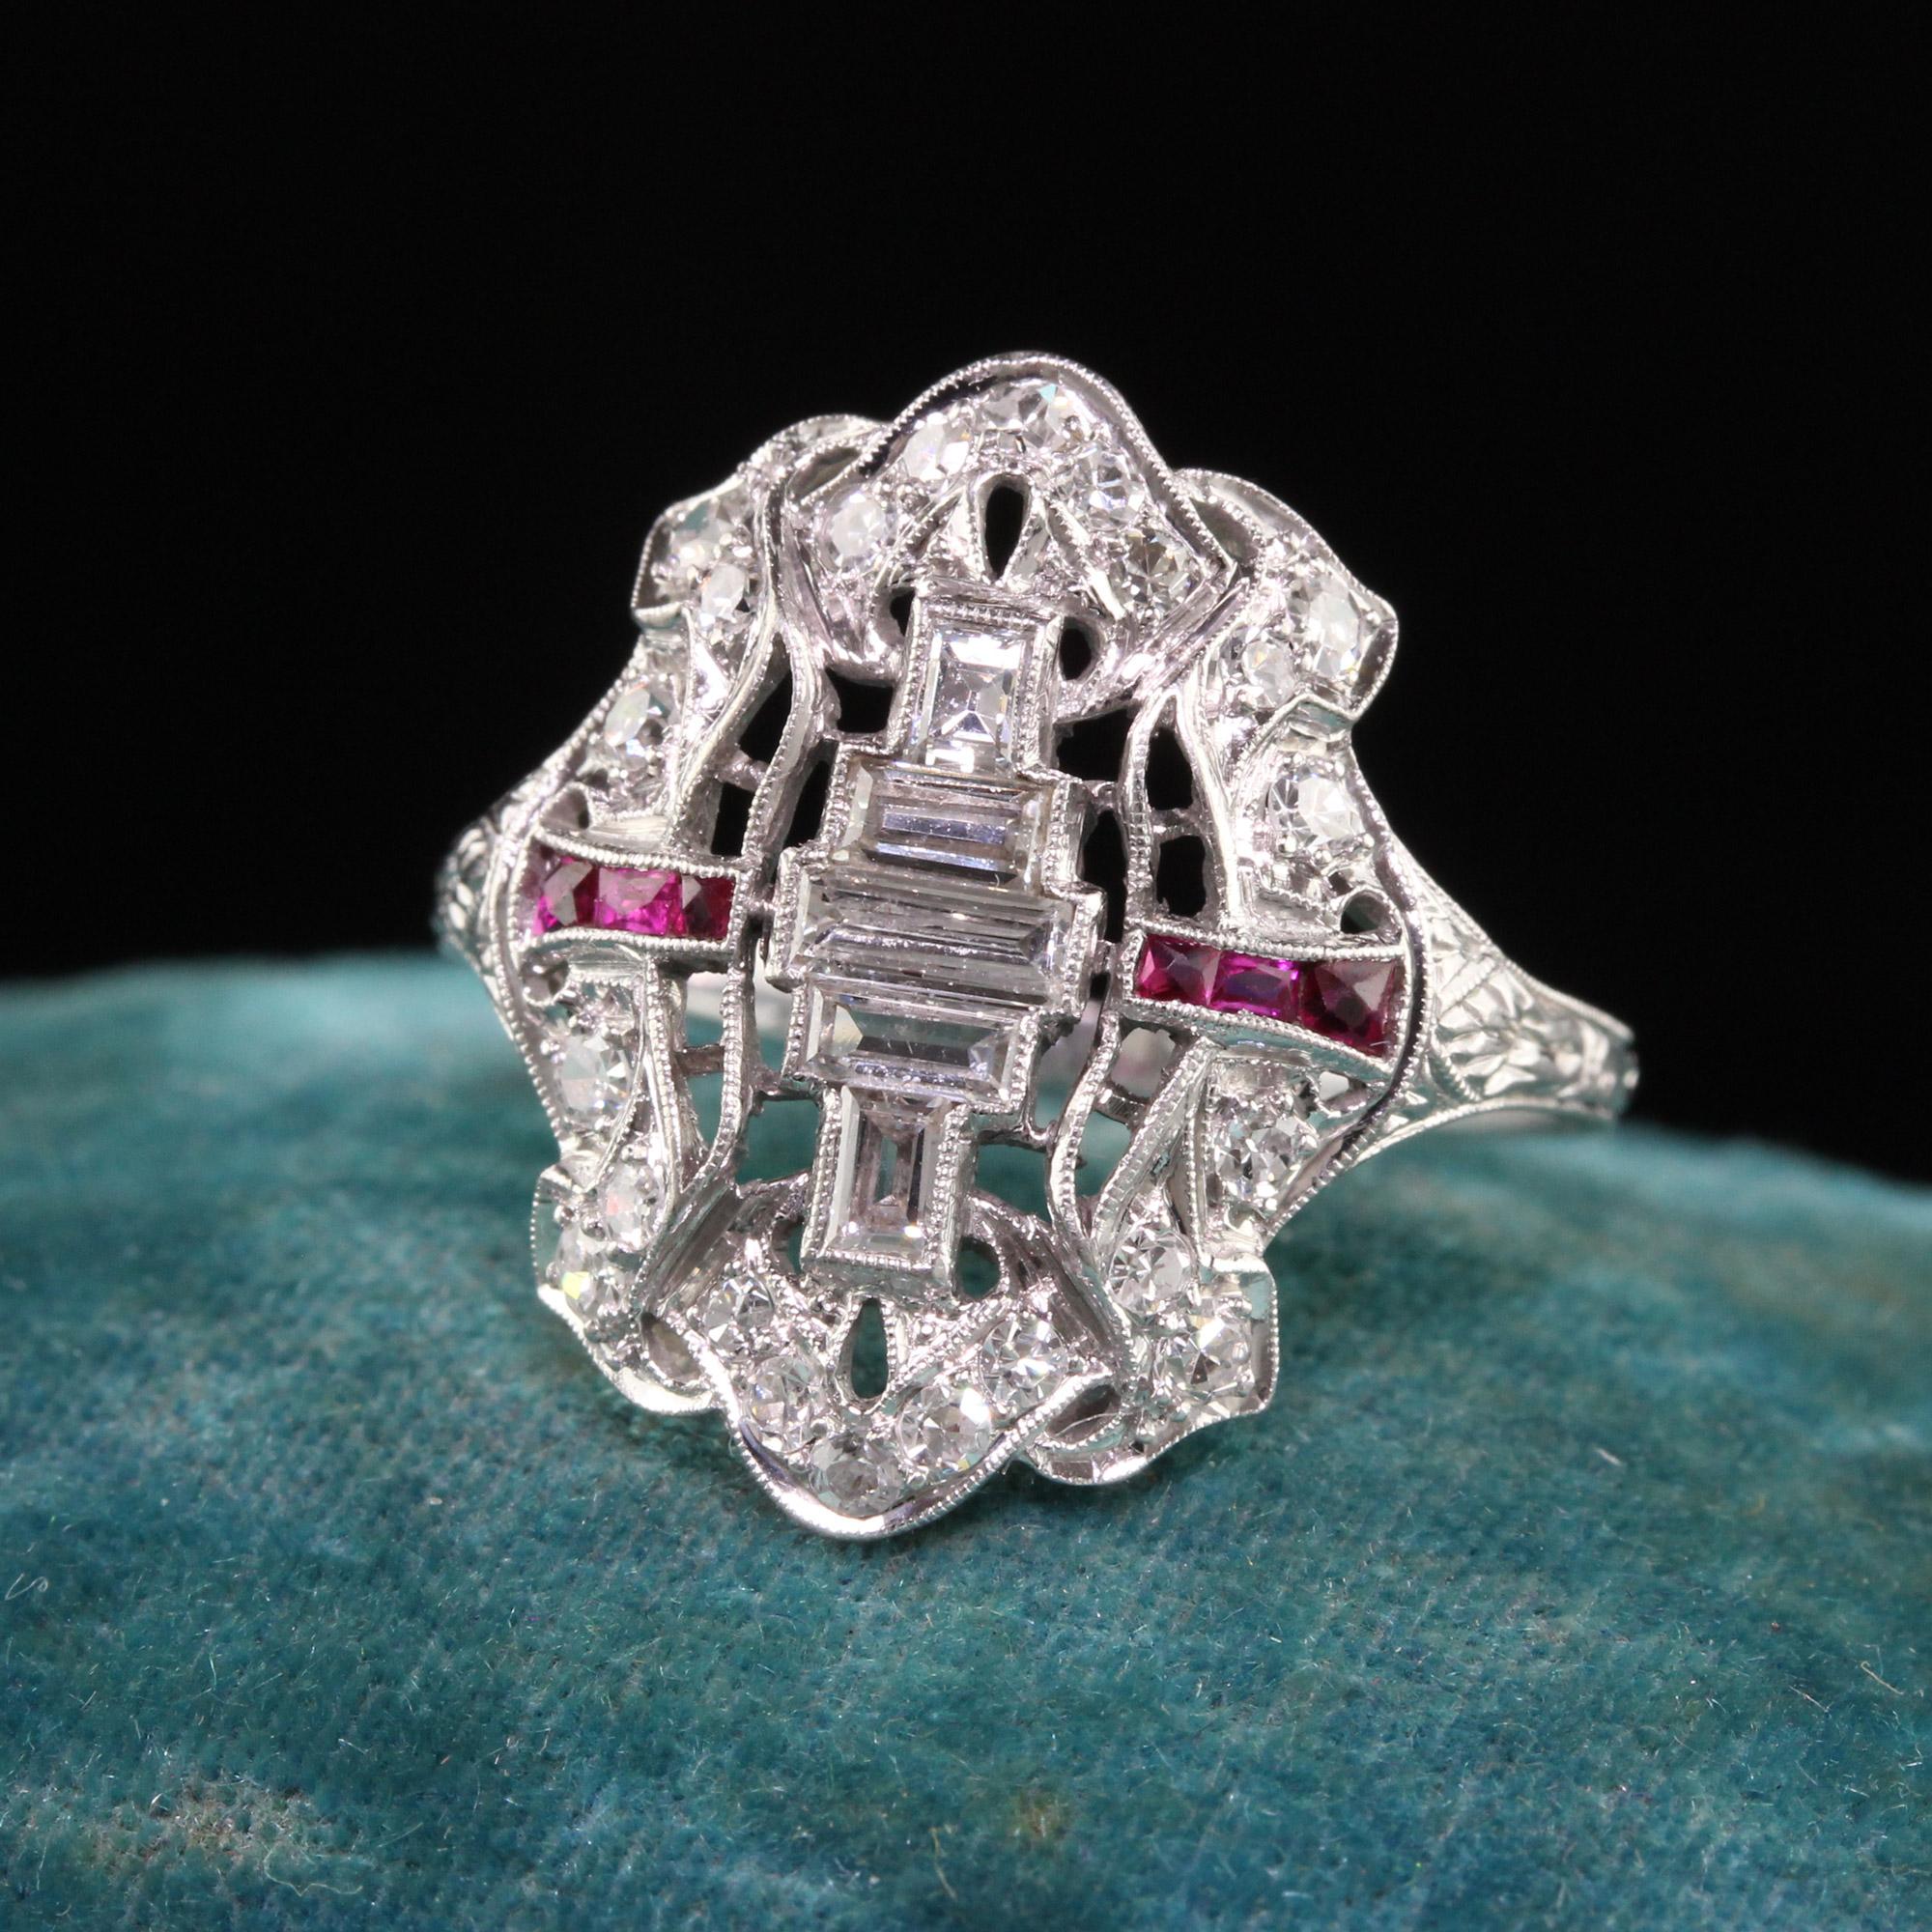 Beautiful Antique Art Deco Platinum Baguette Old Euro Diamond and Ruby Shield Ring. This incredible ring is crafted in platinum. The ring has old cut baguettes in the center and old cut diamonds on top of the ring. There are also french cut natural